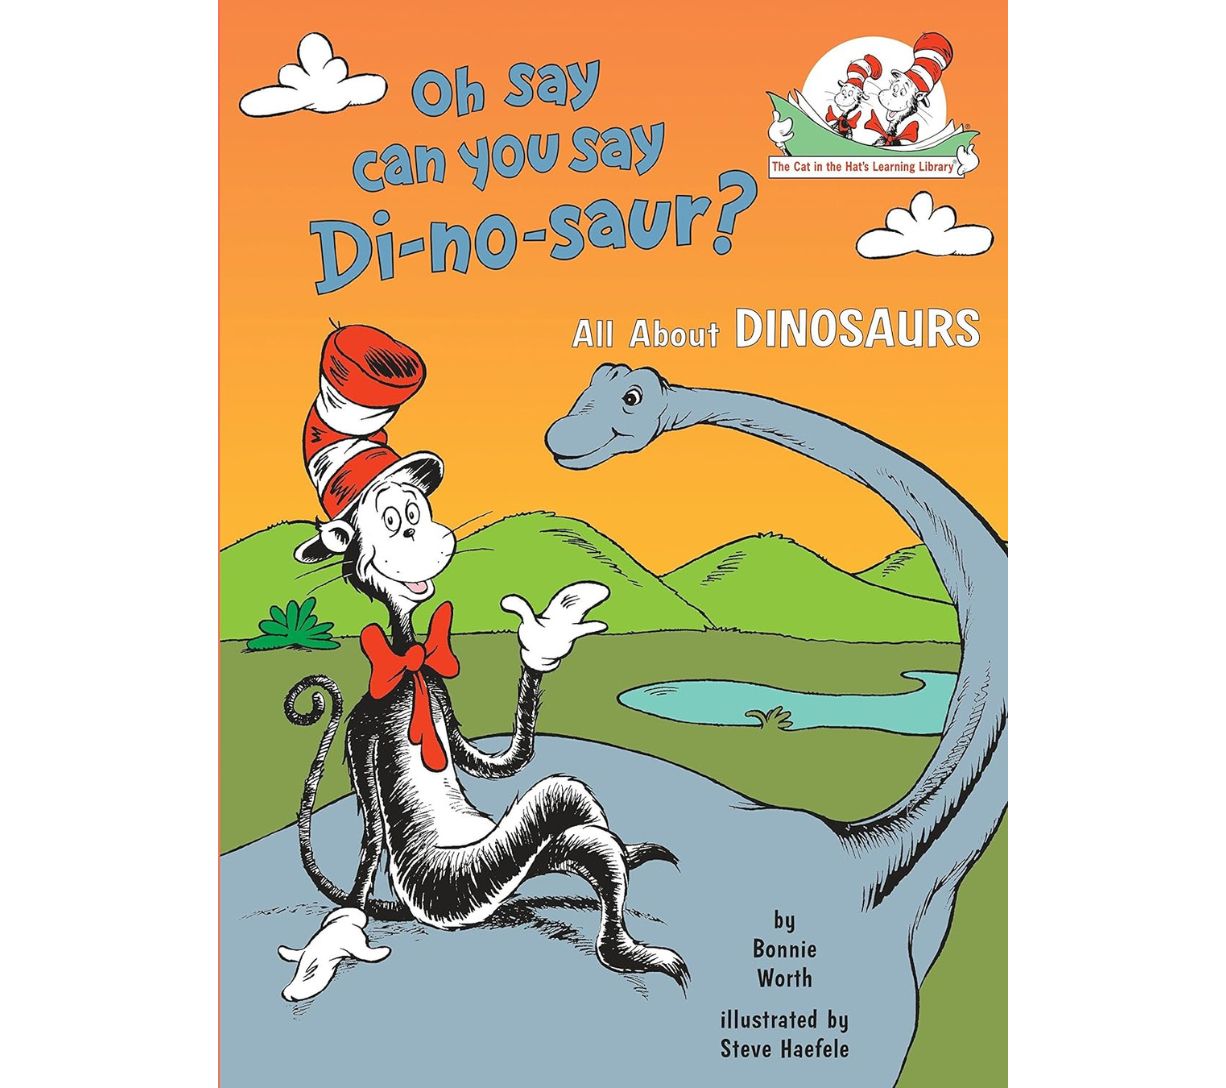 Dr. Seuss, The Cat in the Hat's Learning Library - Oh Say Can You Say Dinosaur